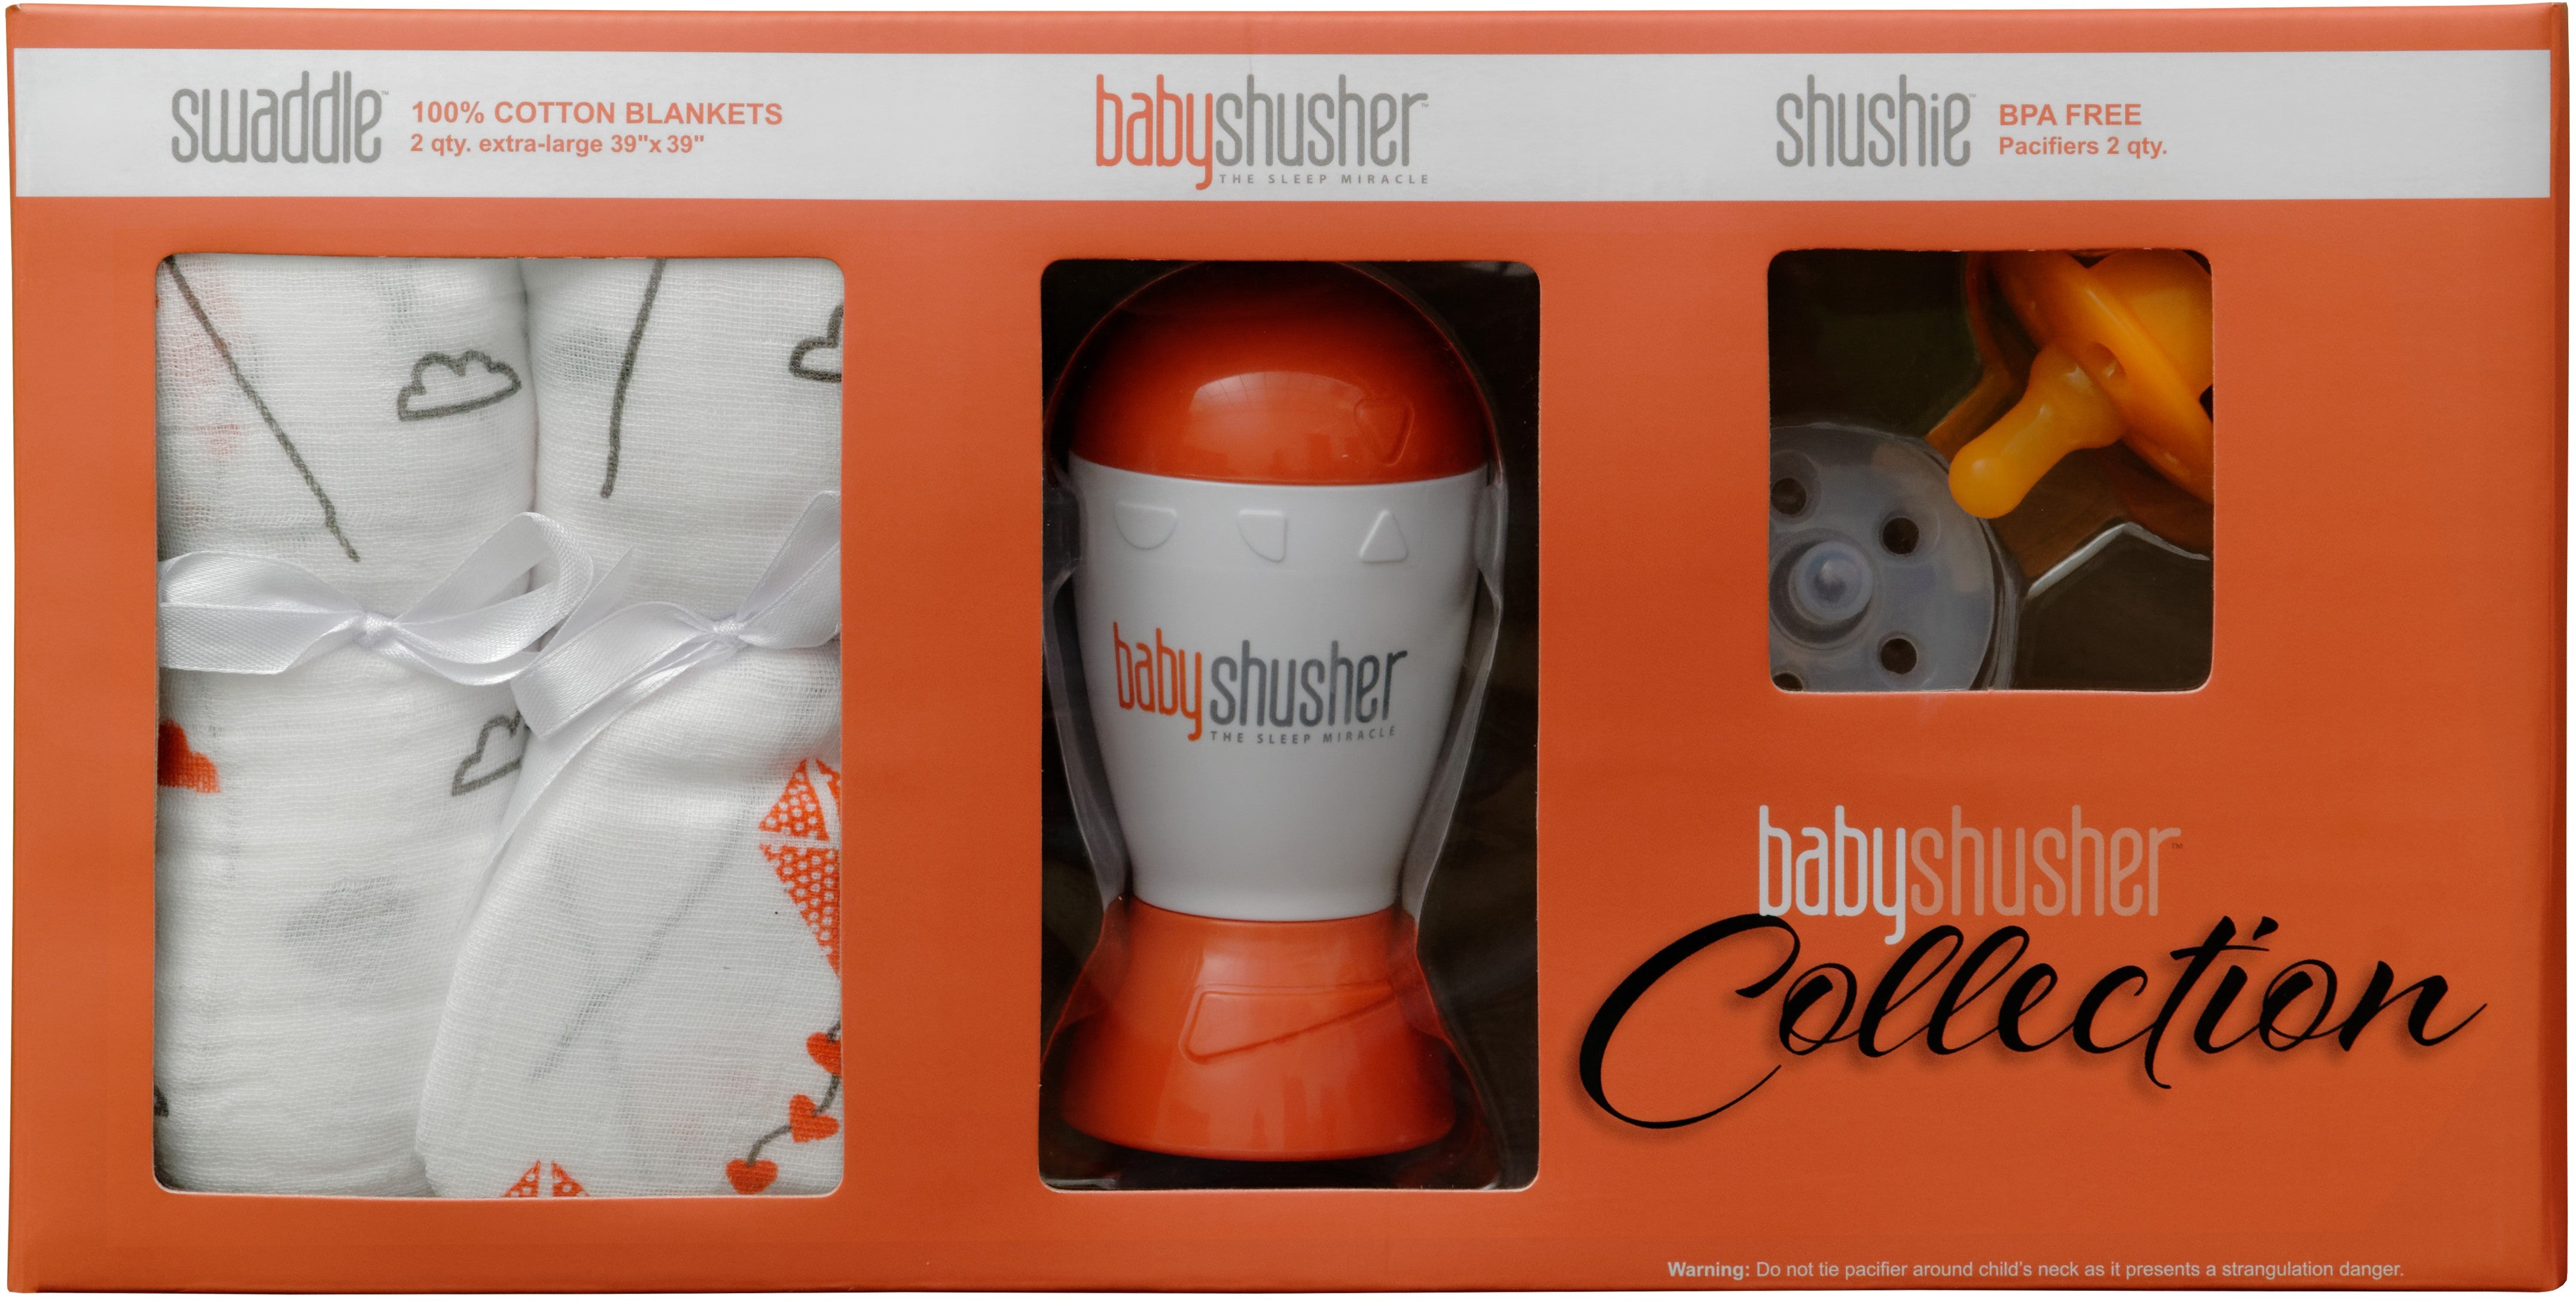 Baby Shusher®, The Sleep Miracle™, The Quickest Way To Get Baby to Sleep